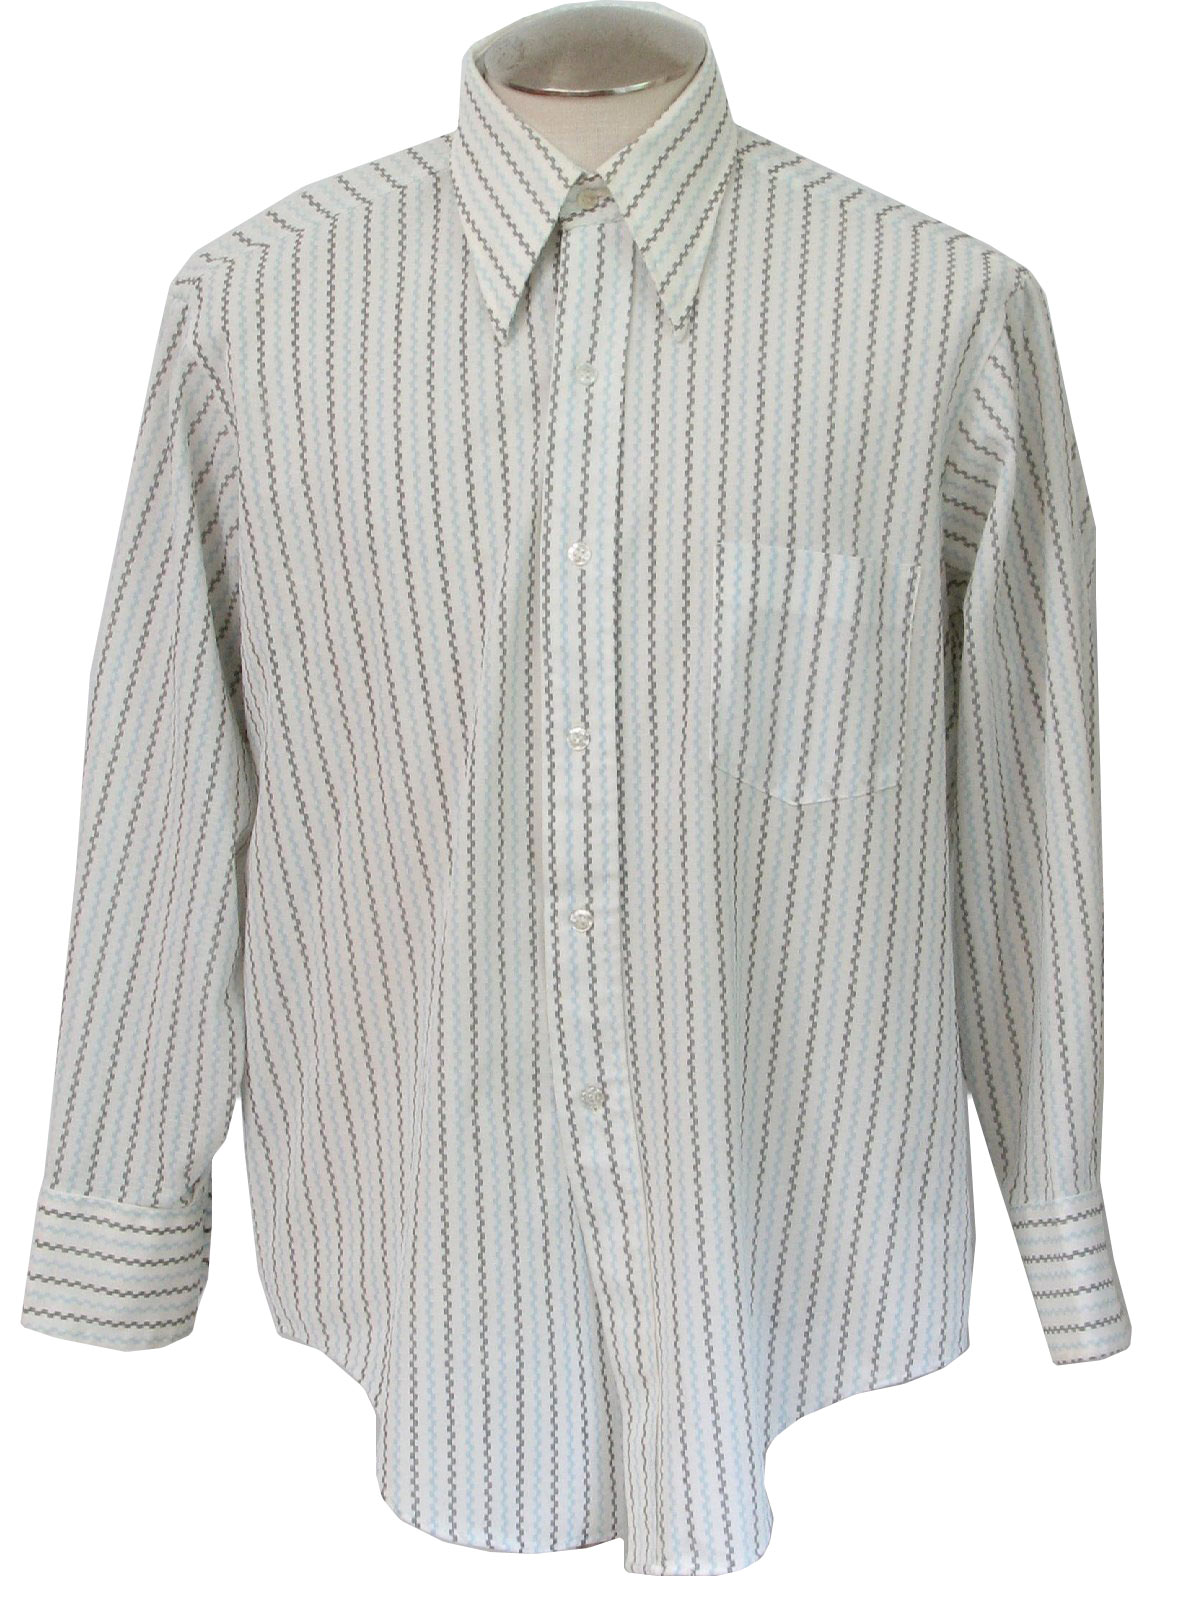 Towncraft Seventies Vintage Shirt: 70s -Towncraft- Mens polyester long